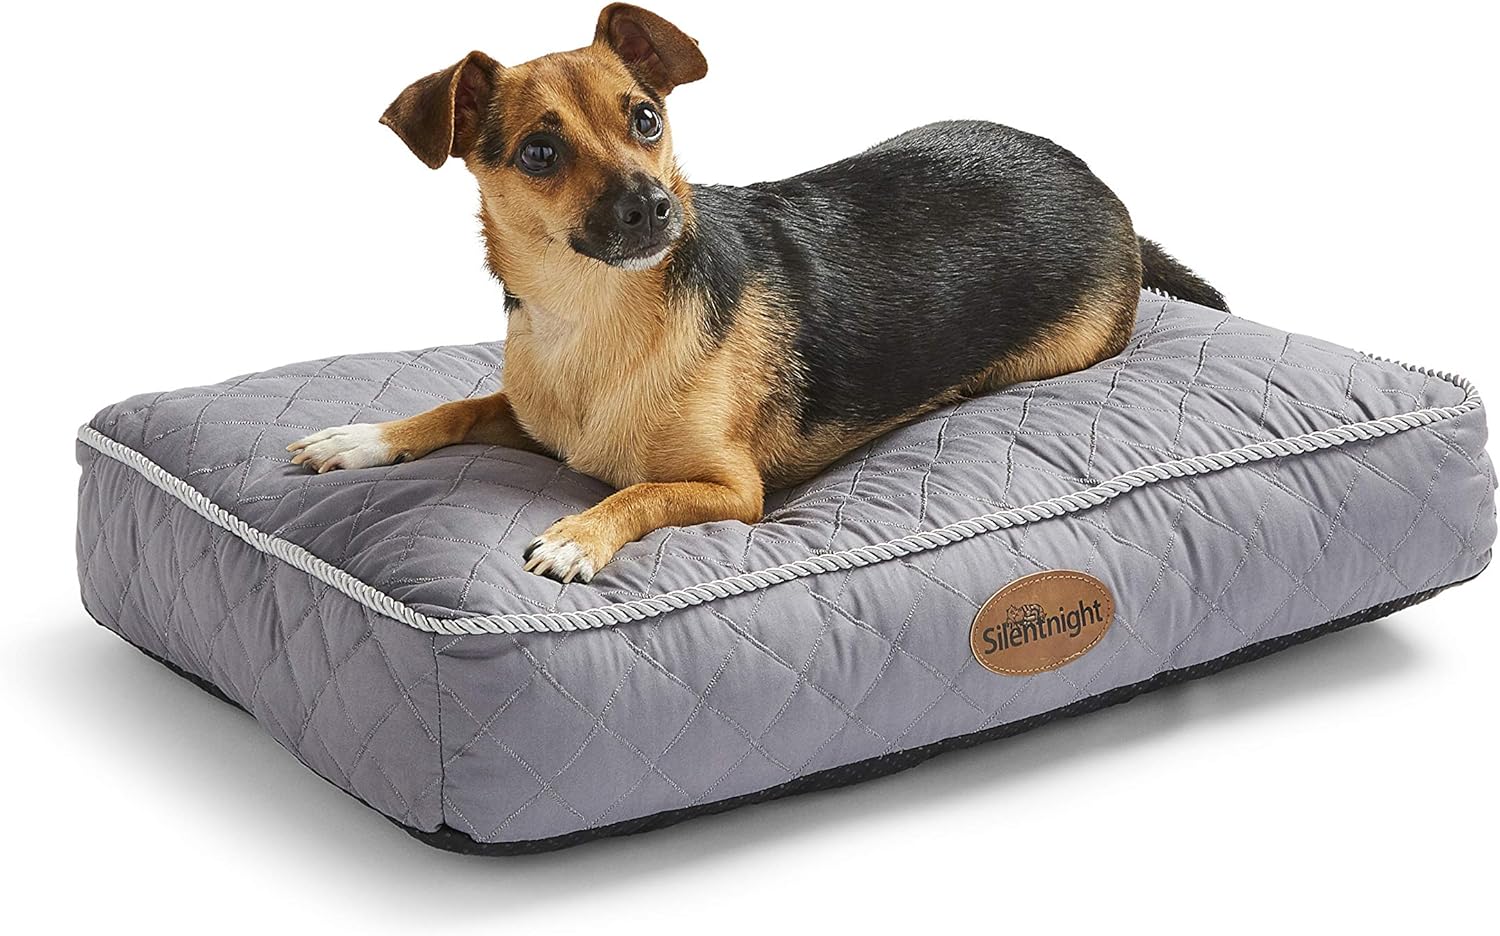 Comfy Canine Hangout: This Dog Bed Bench Lets Your Pup Relax in Style